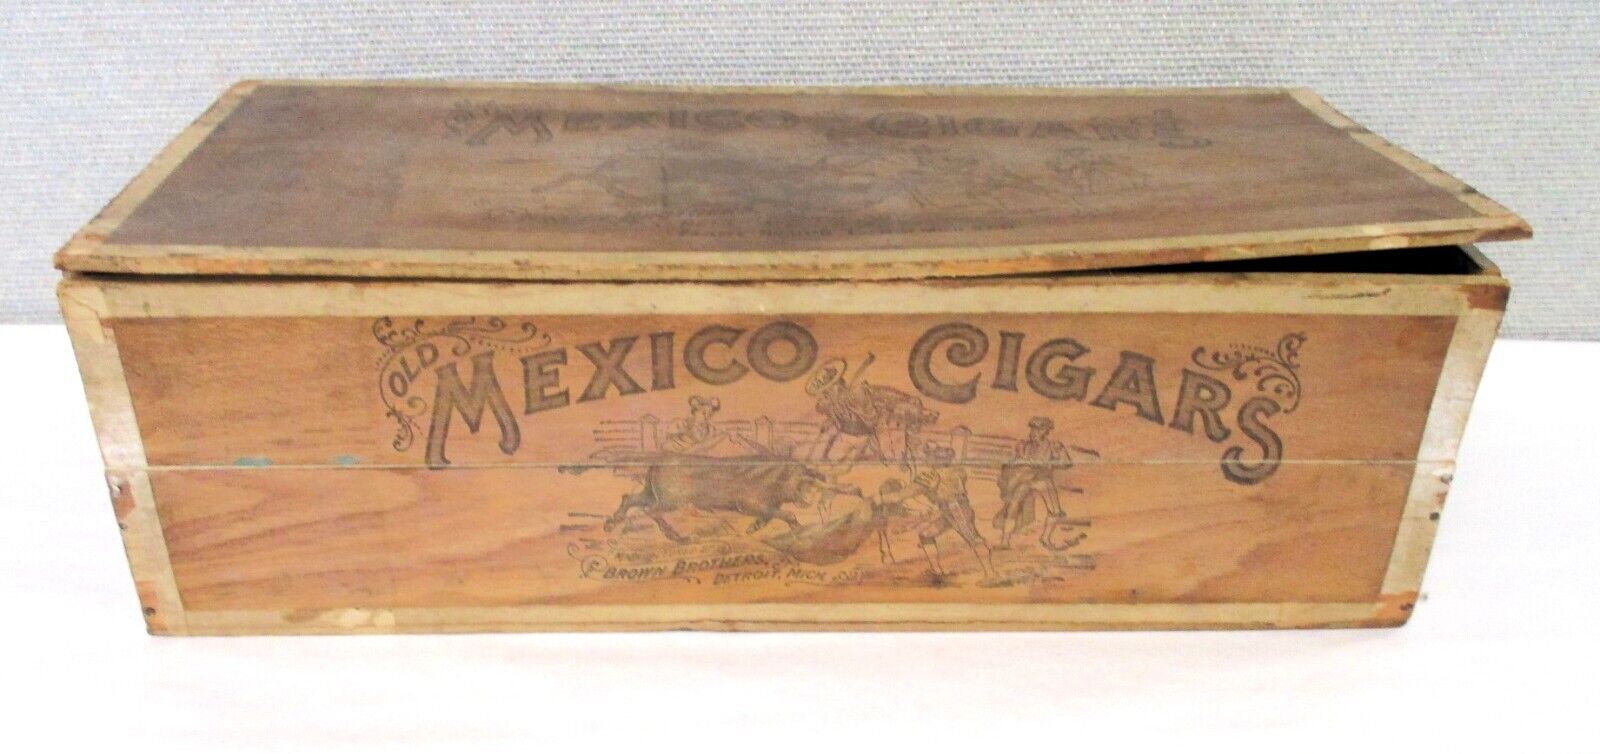 1879-1920 OLD MEXICO CIGARS STORE DISPLAY WOODEN BOX WITH CALVERT LITHO CO LITHO